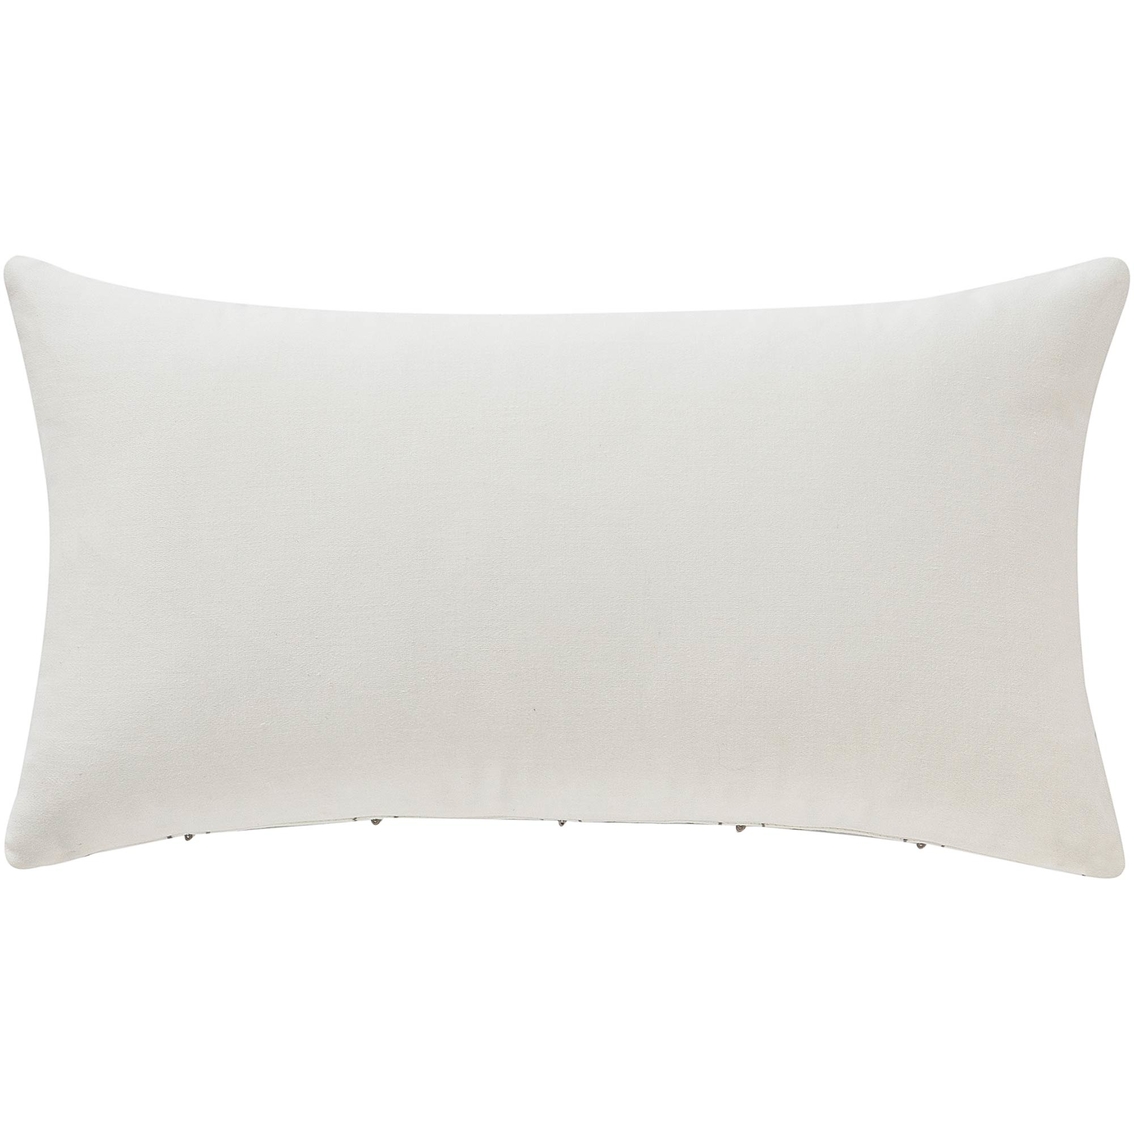 Waterford Celine Dove Grey 11 x 20 in. Breakfast Decorative Pillow - Image 2 of 2